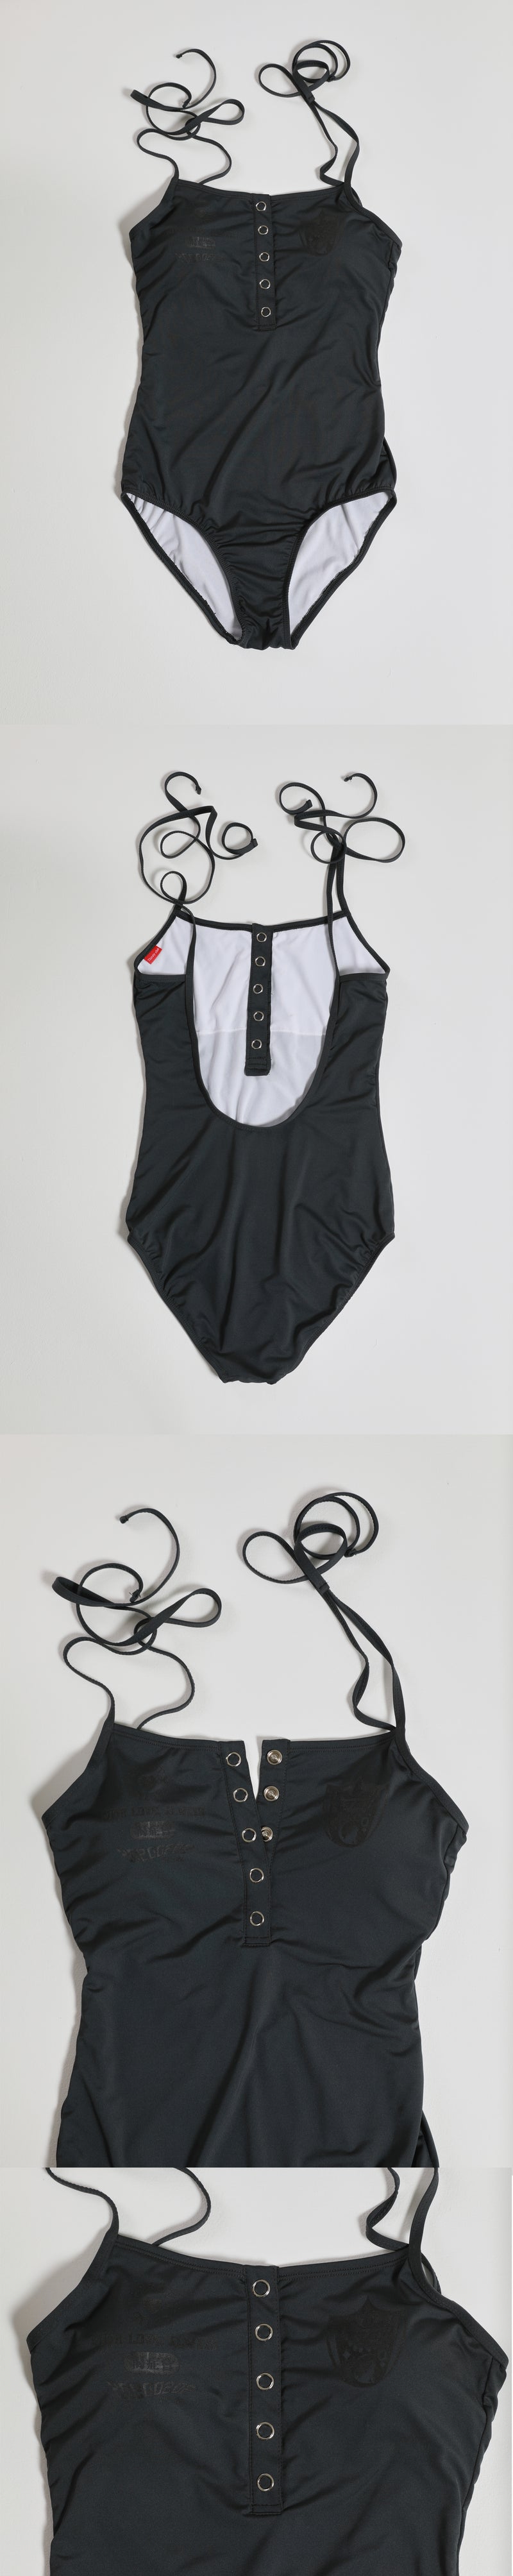 Athlete swimsuit - Charcoal